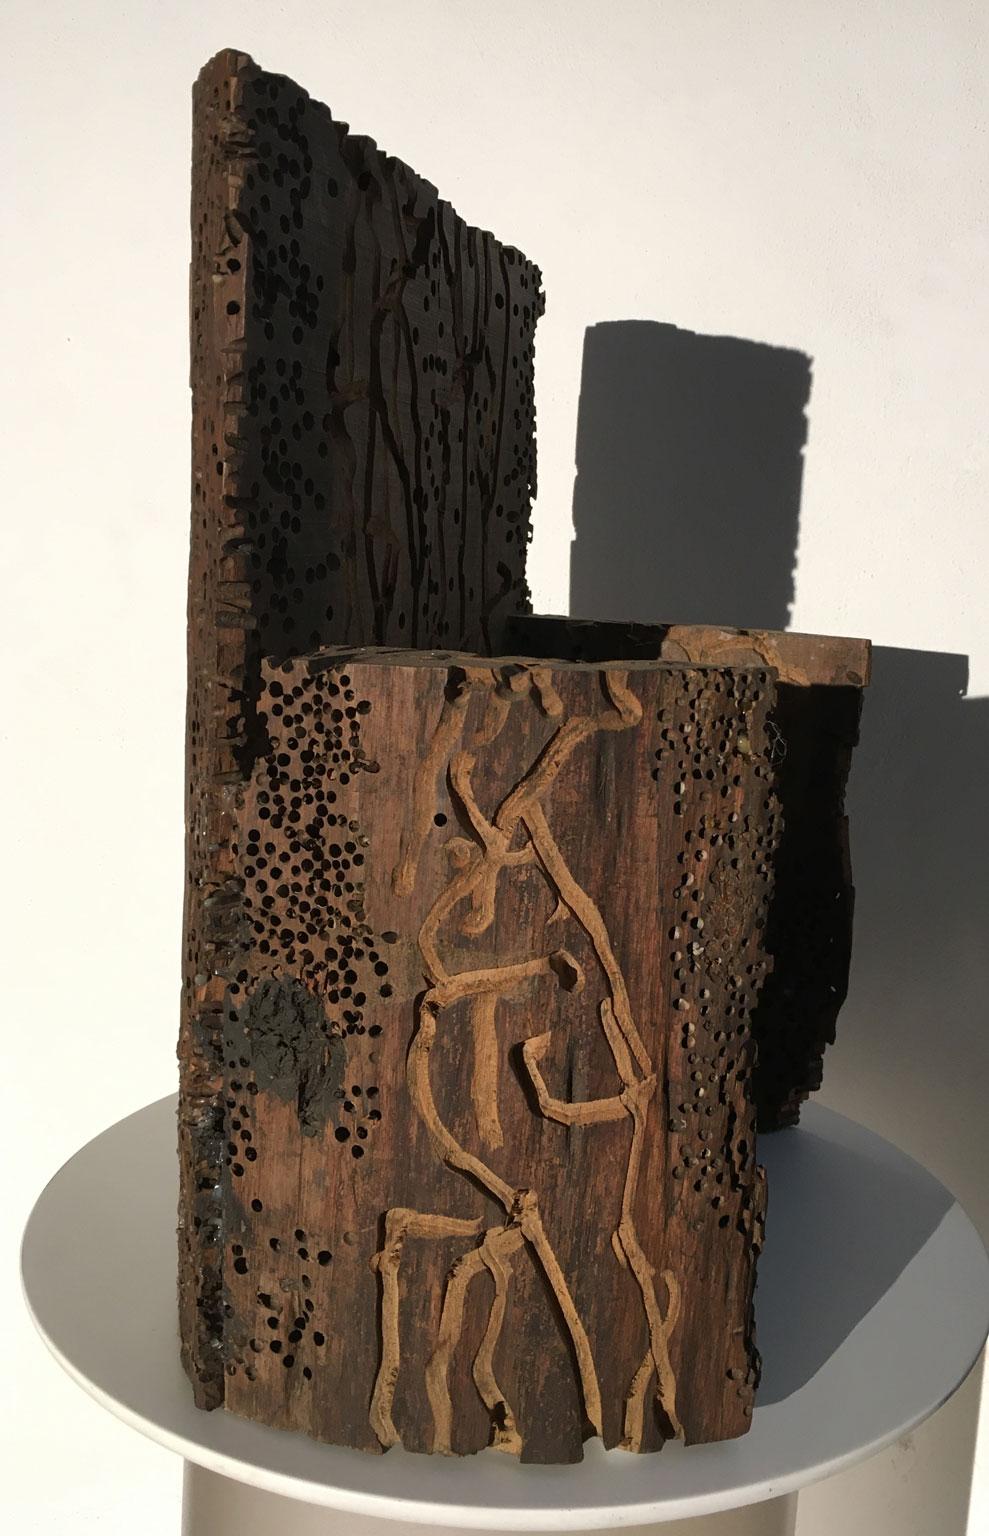 1985 Italy Wooden Abstract Sculpture by Urano Palma Grande Trono Big Throne For Sale 2